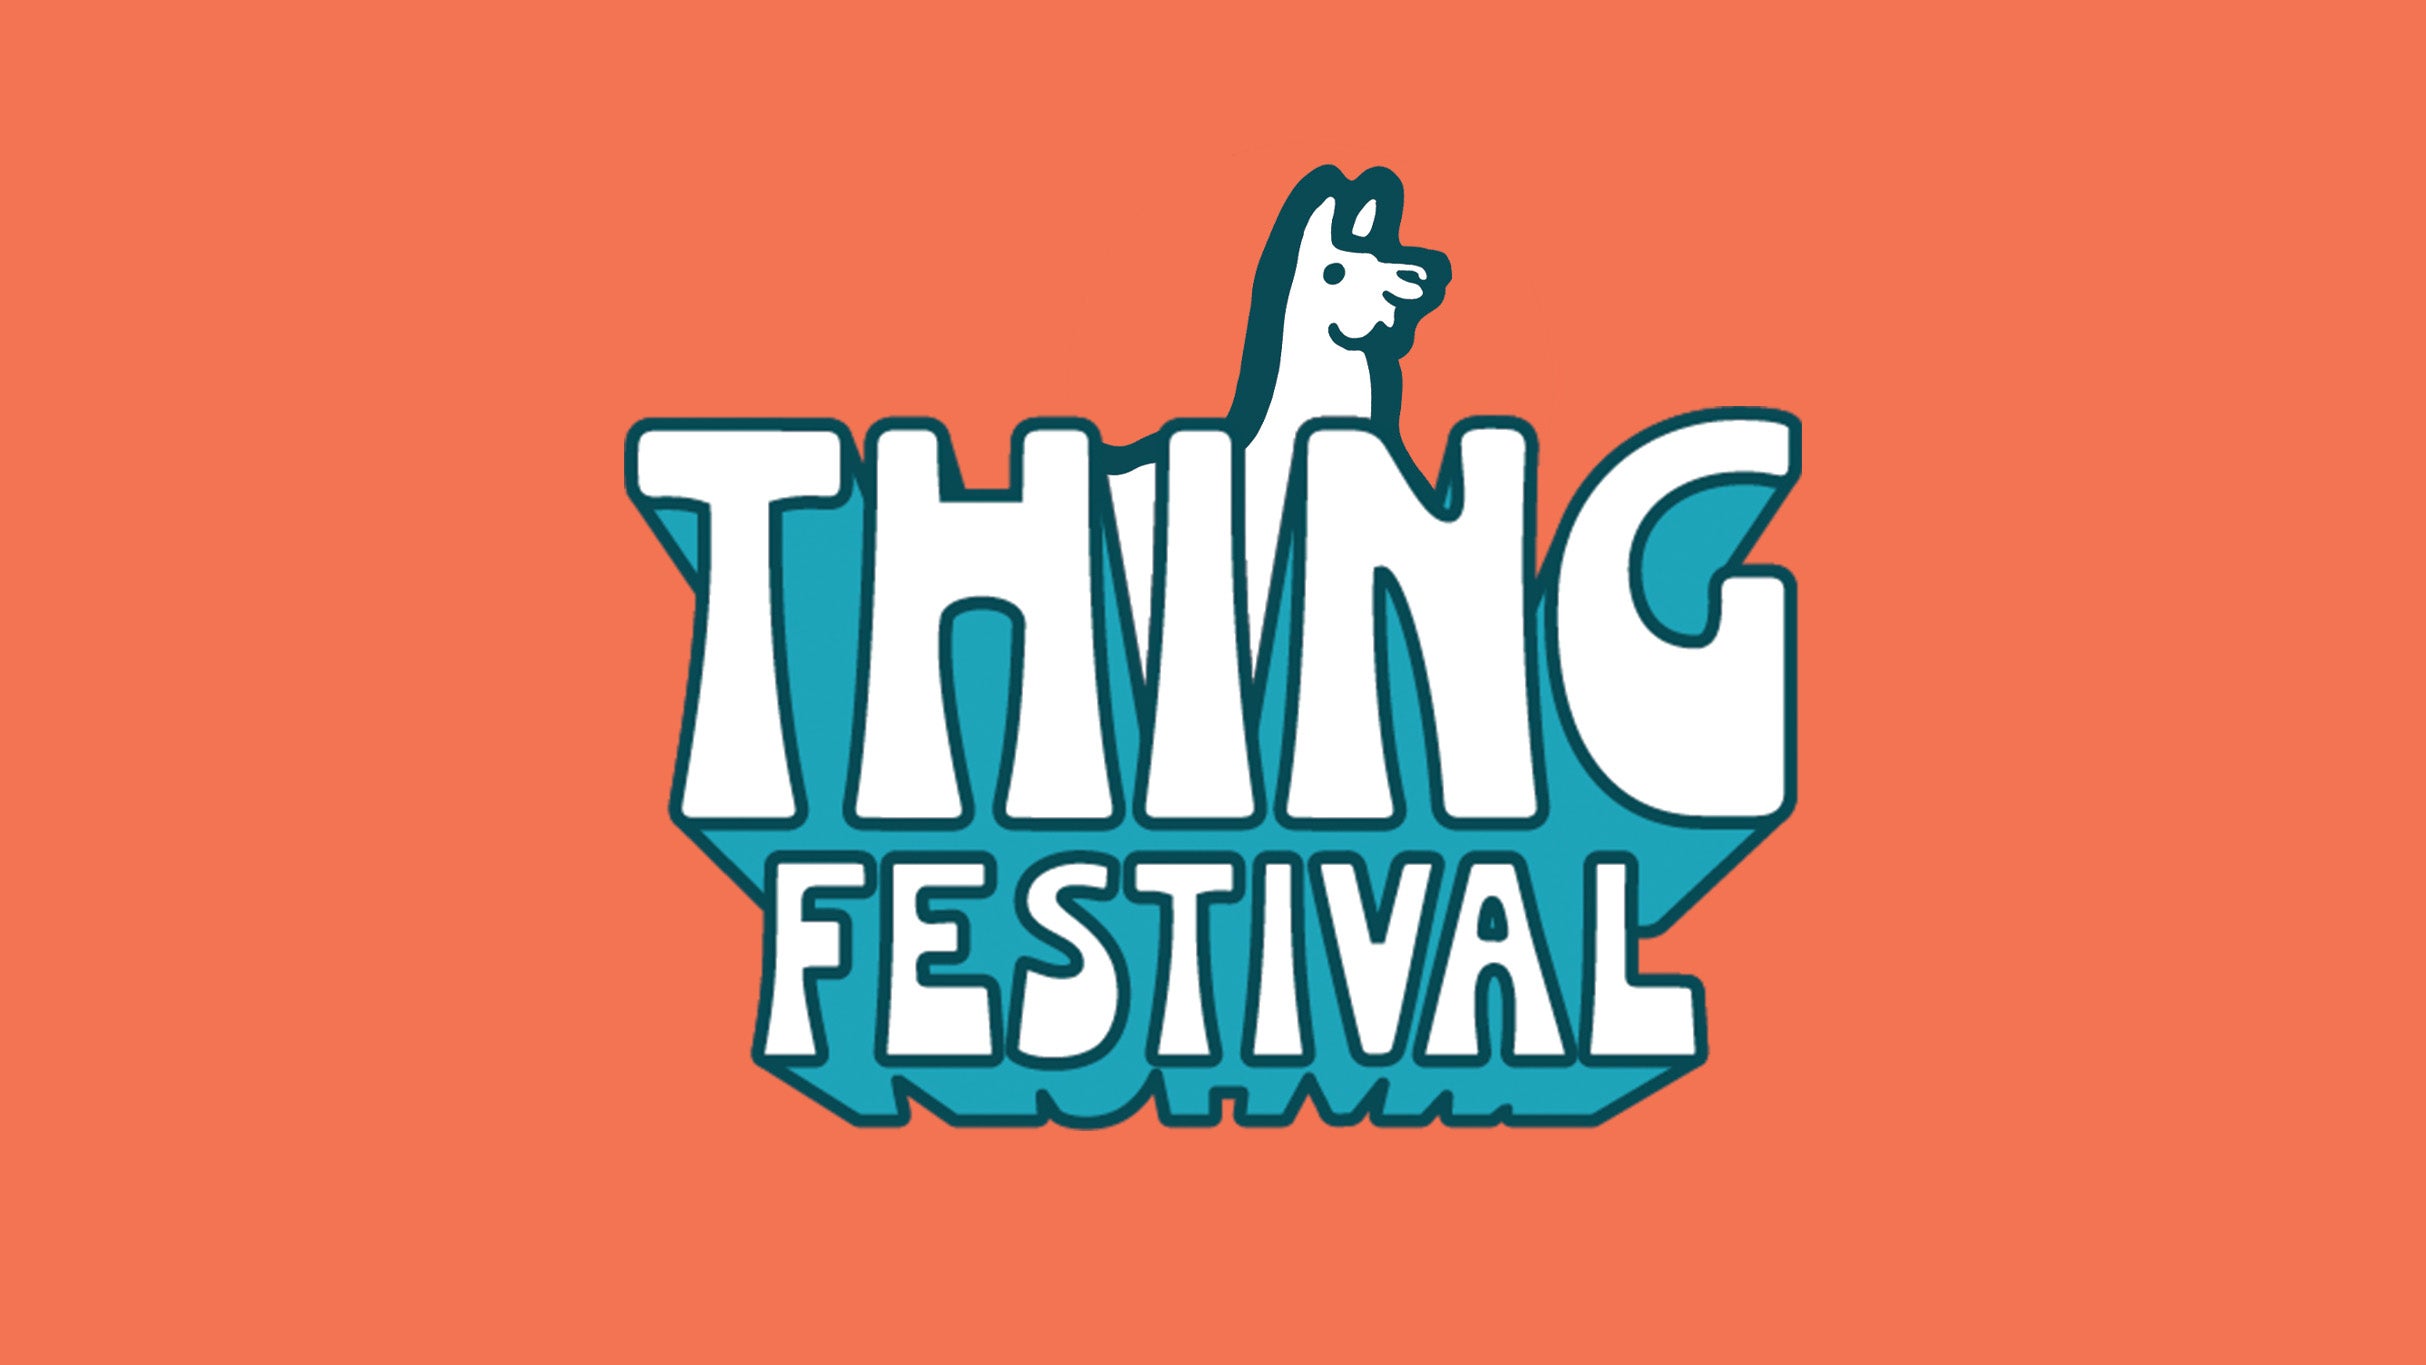 THING Festival 3-Day Pass! at Remlinger Farms